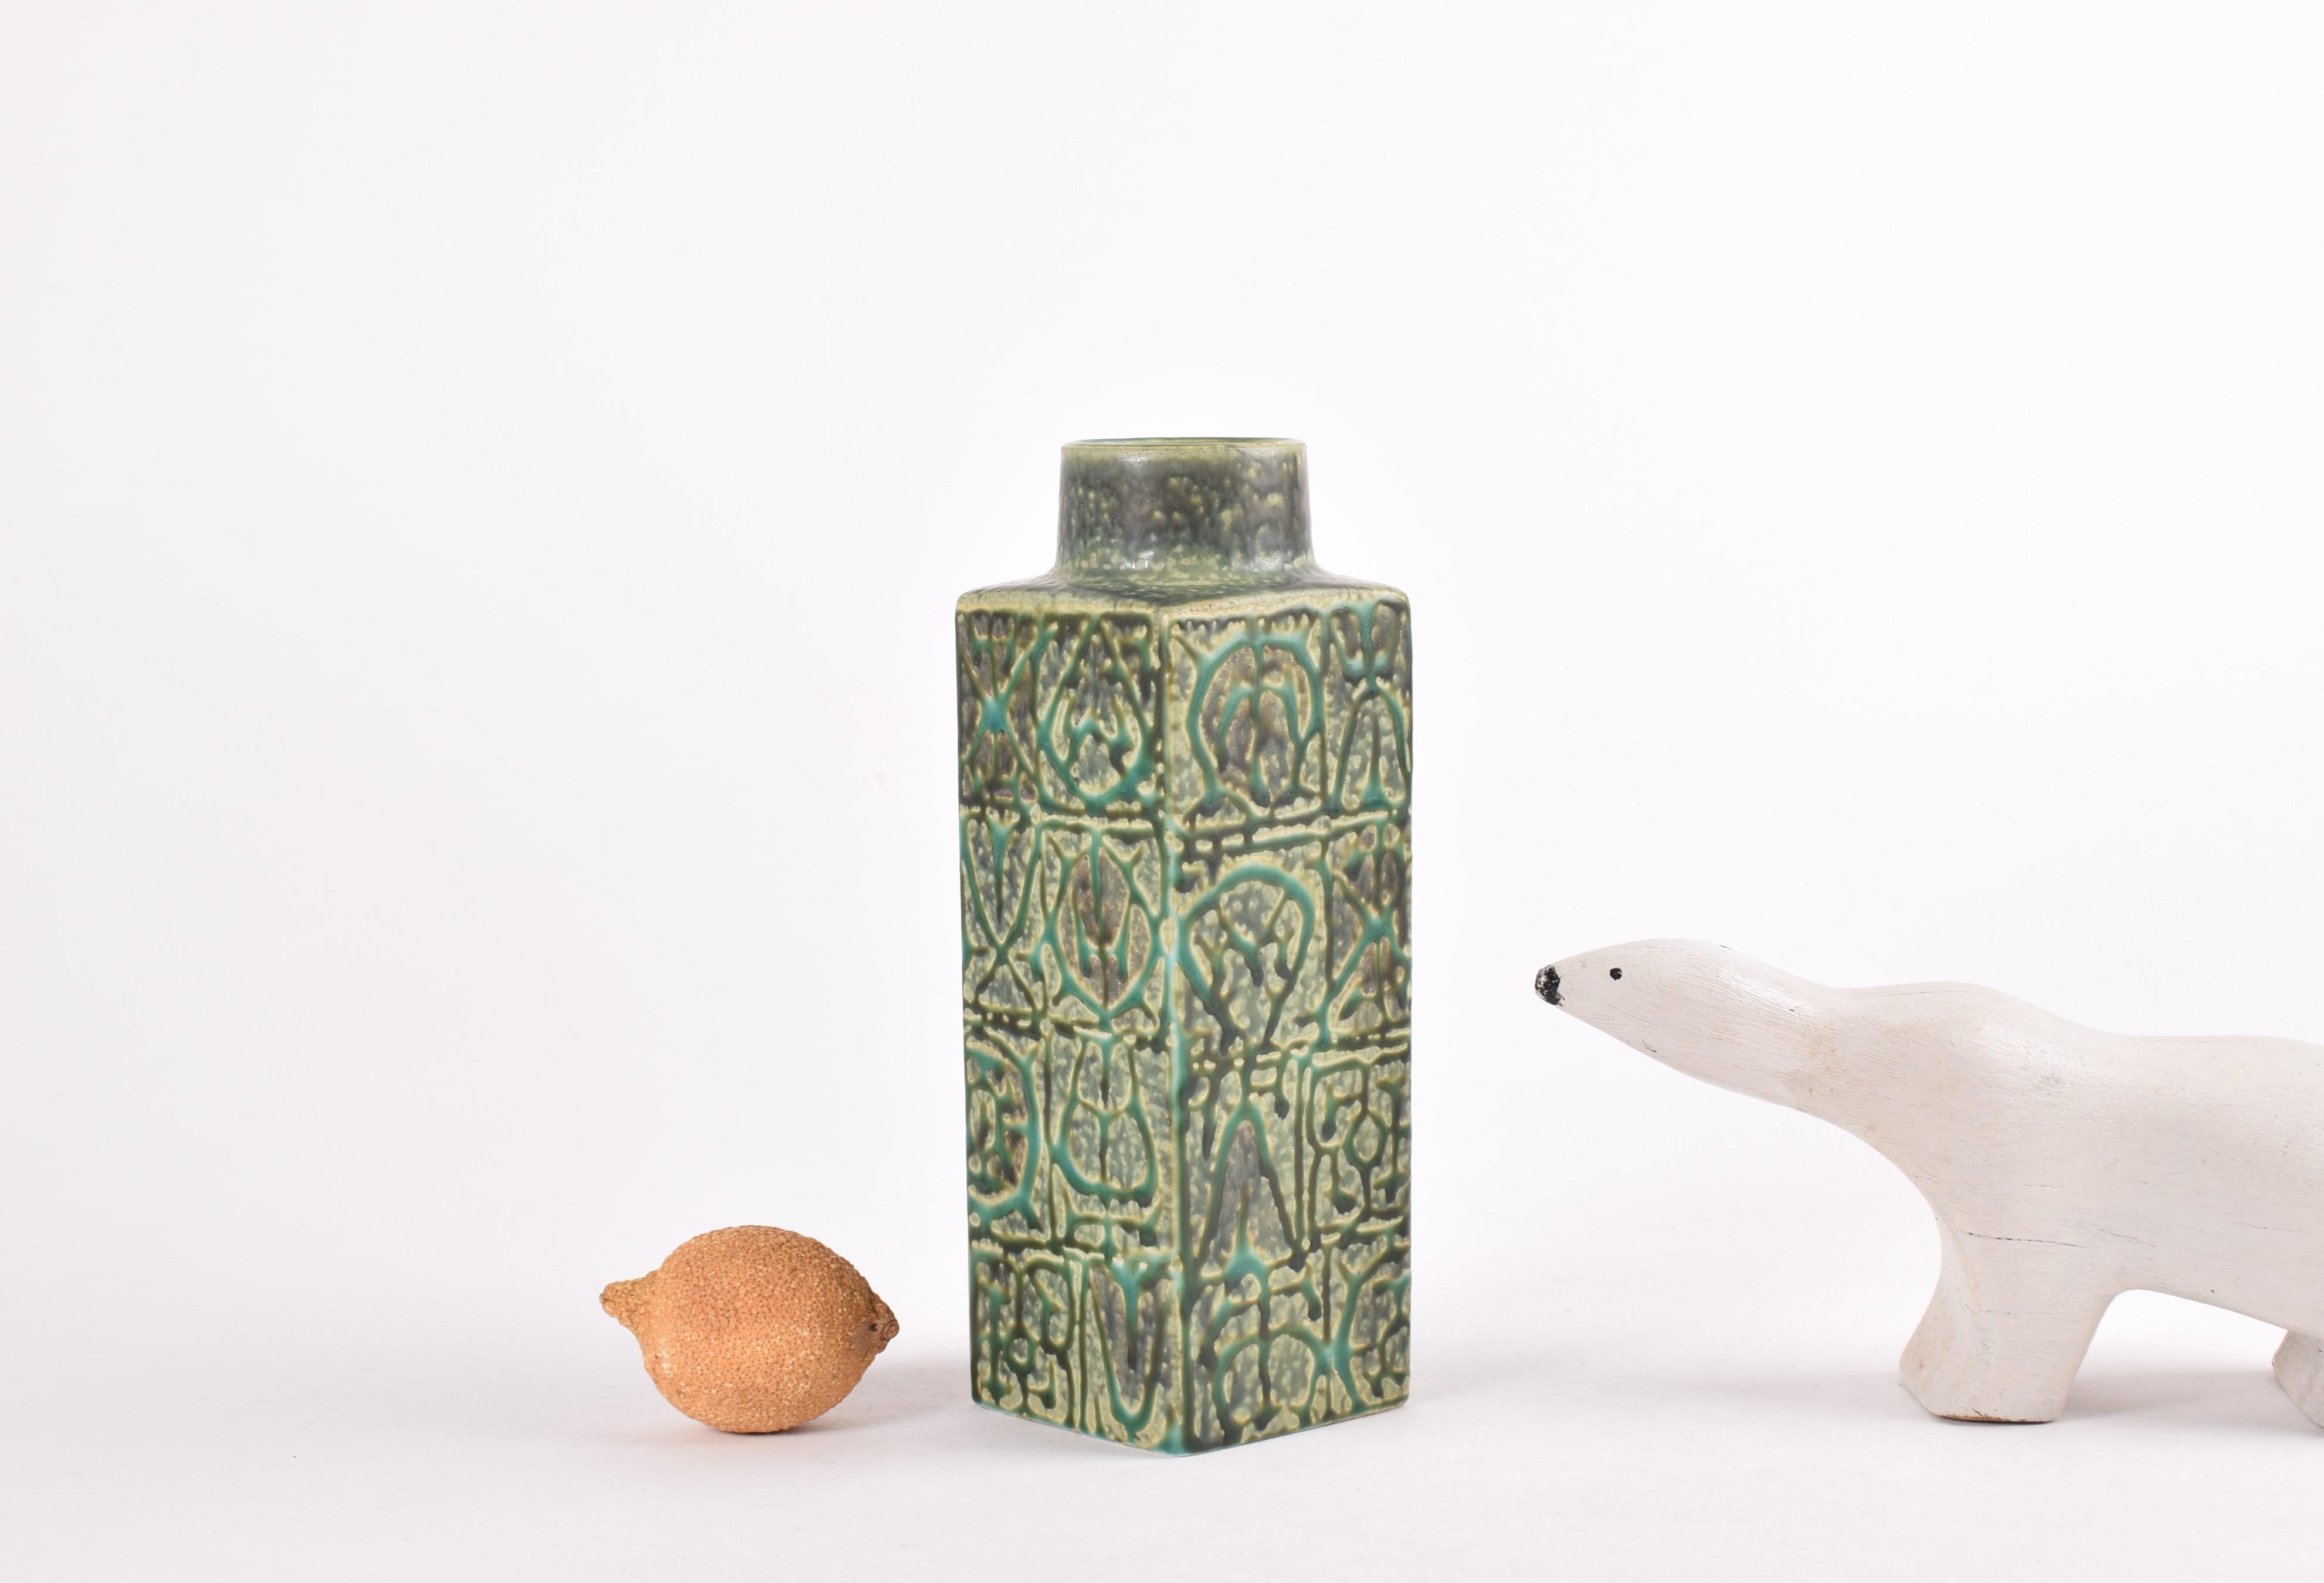 This ceramic vase from Aluminia was designed by Nils Thorsson in the late 1960s. It is from the 